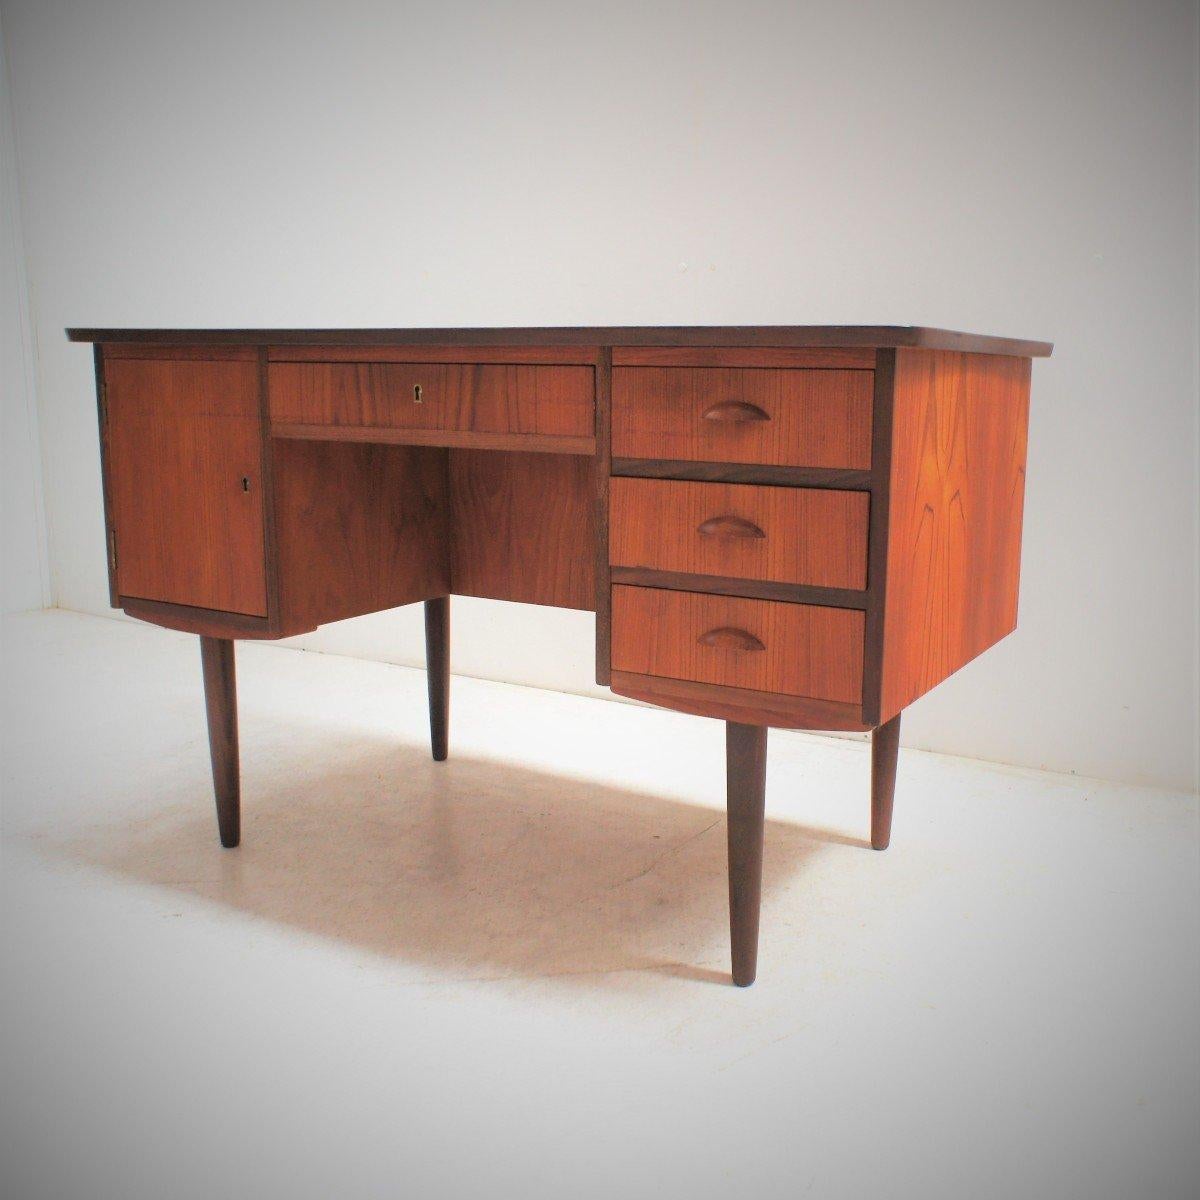 Vintage Scandinavian desk
Elegant Scandinavian desk. This desk, with a concave top, has two pedestals; one opening by a door, the other by three drawers, and a large frieze drawer. The visitor side has a storage niche with a mobile shelf. Key